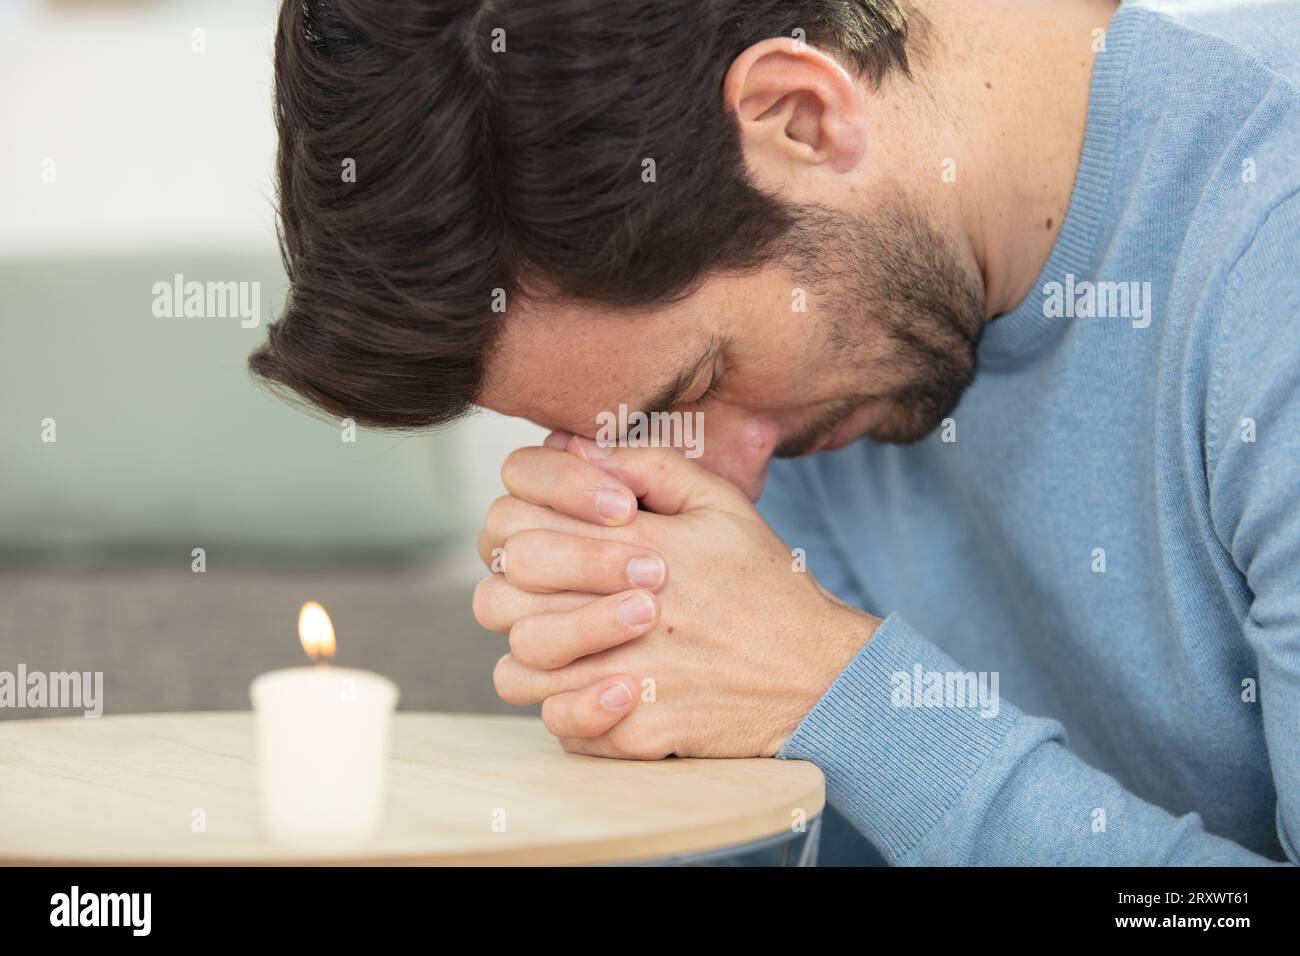 picture of young guy prayer or meditation Stock Photo